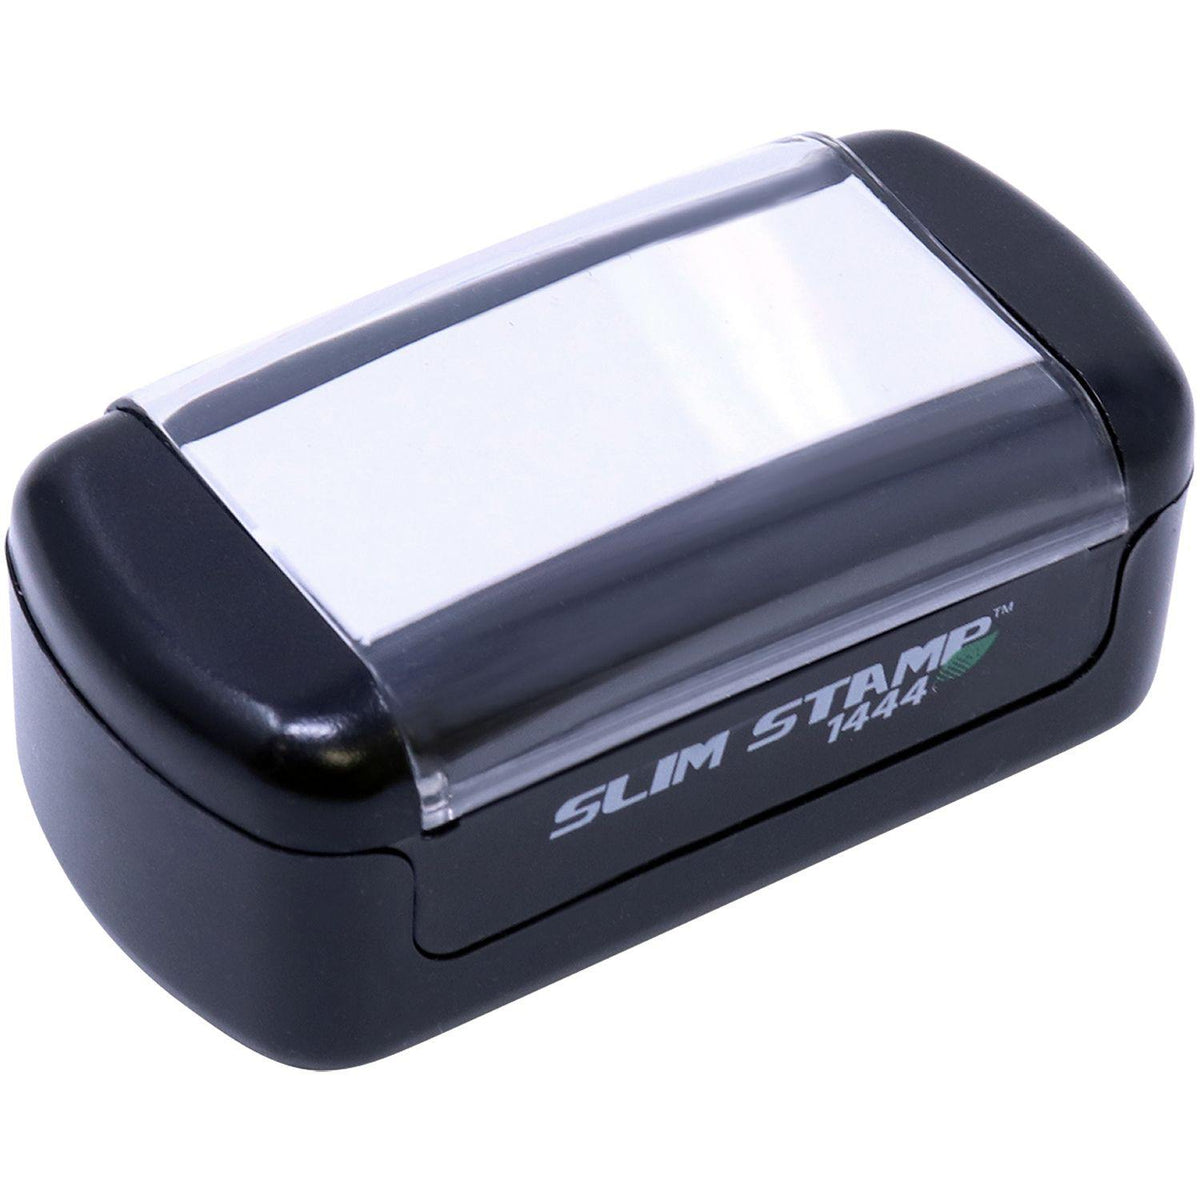 Top Down View of Slim Pre-Inked Patients Signature on File Stamp